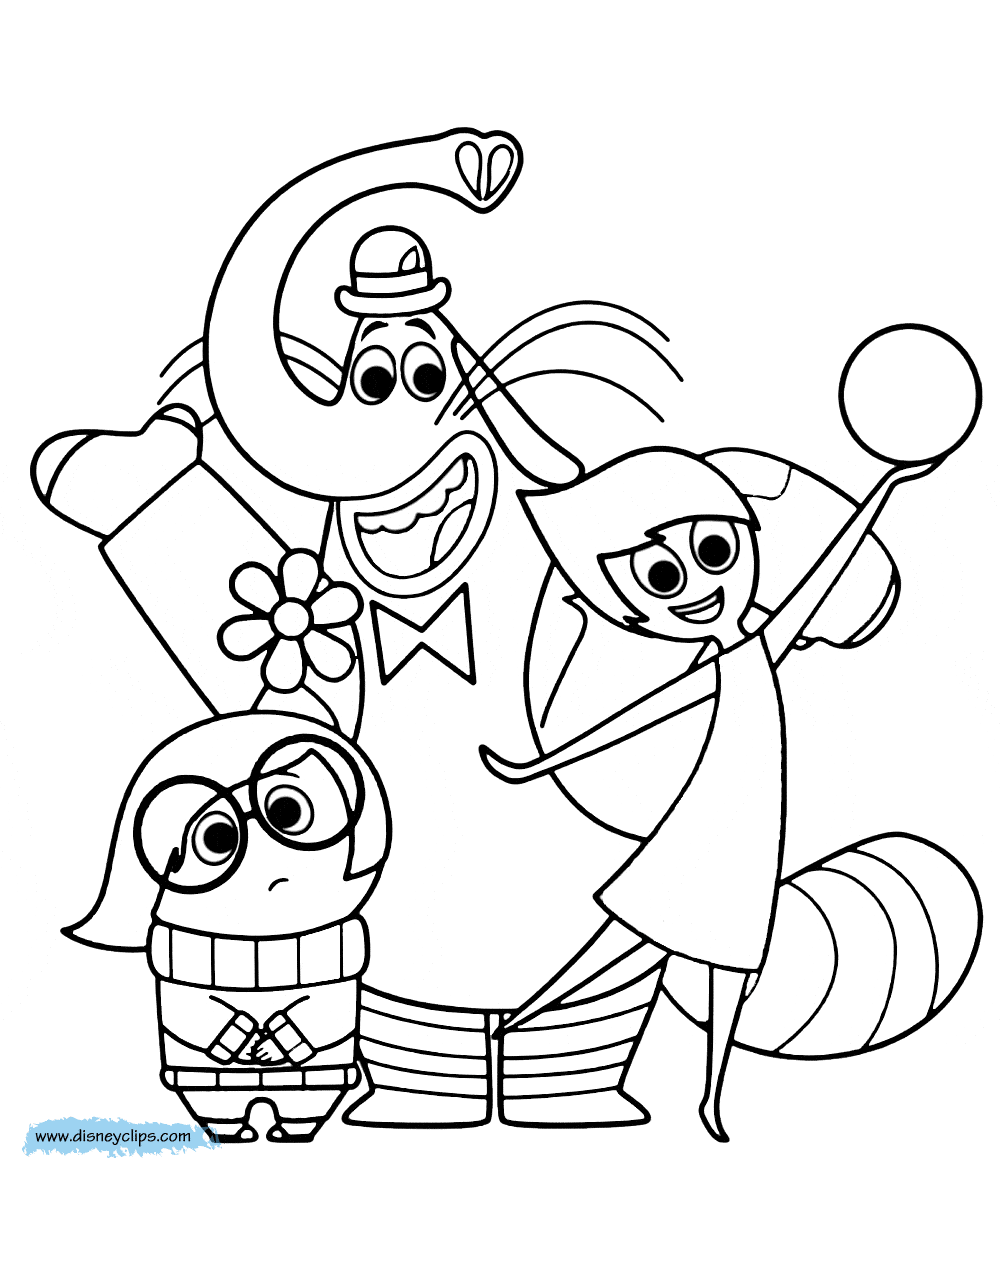 pixar coloring pages coloring pages cars disney pixar page 1 printable pixar coloring pages 